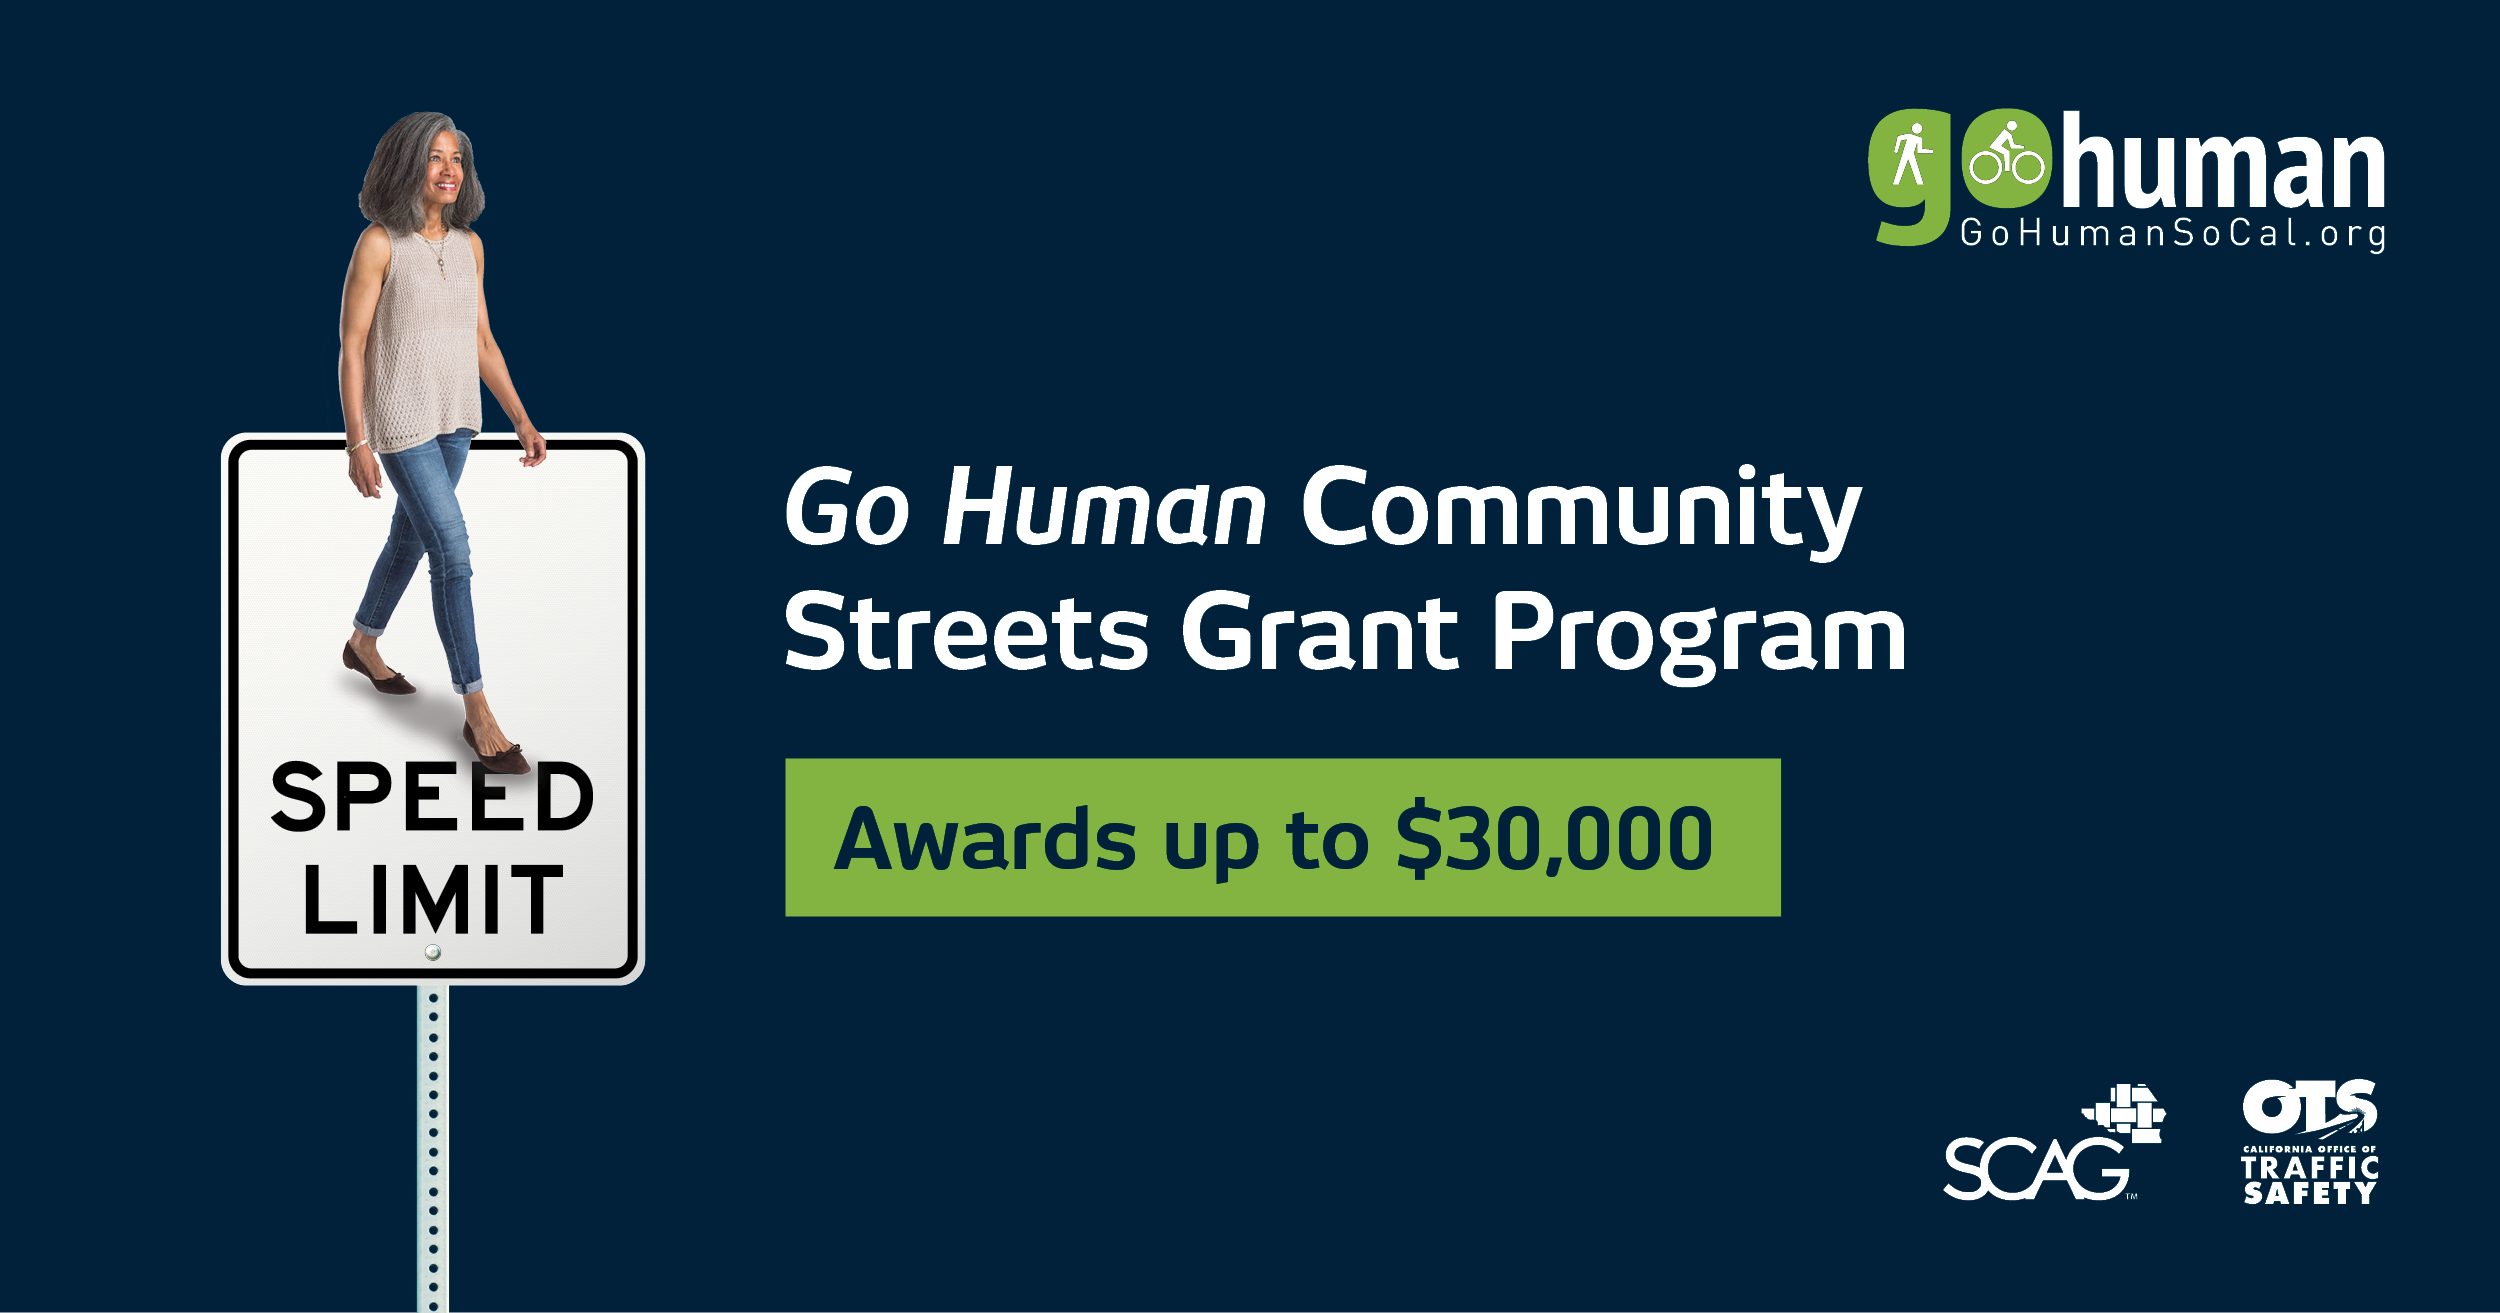 A woman walks across a speed limit street sign, the flyer reads "Go Human Community Streets Grant Program. Awards up to $30,000."